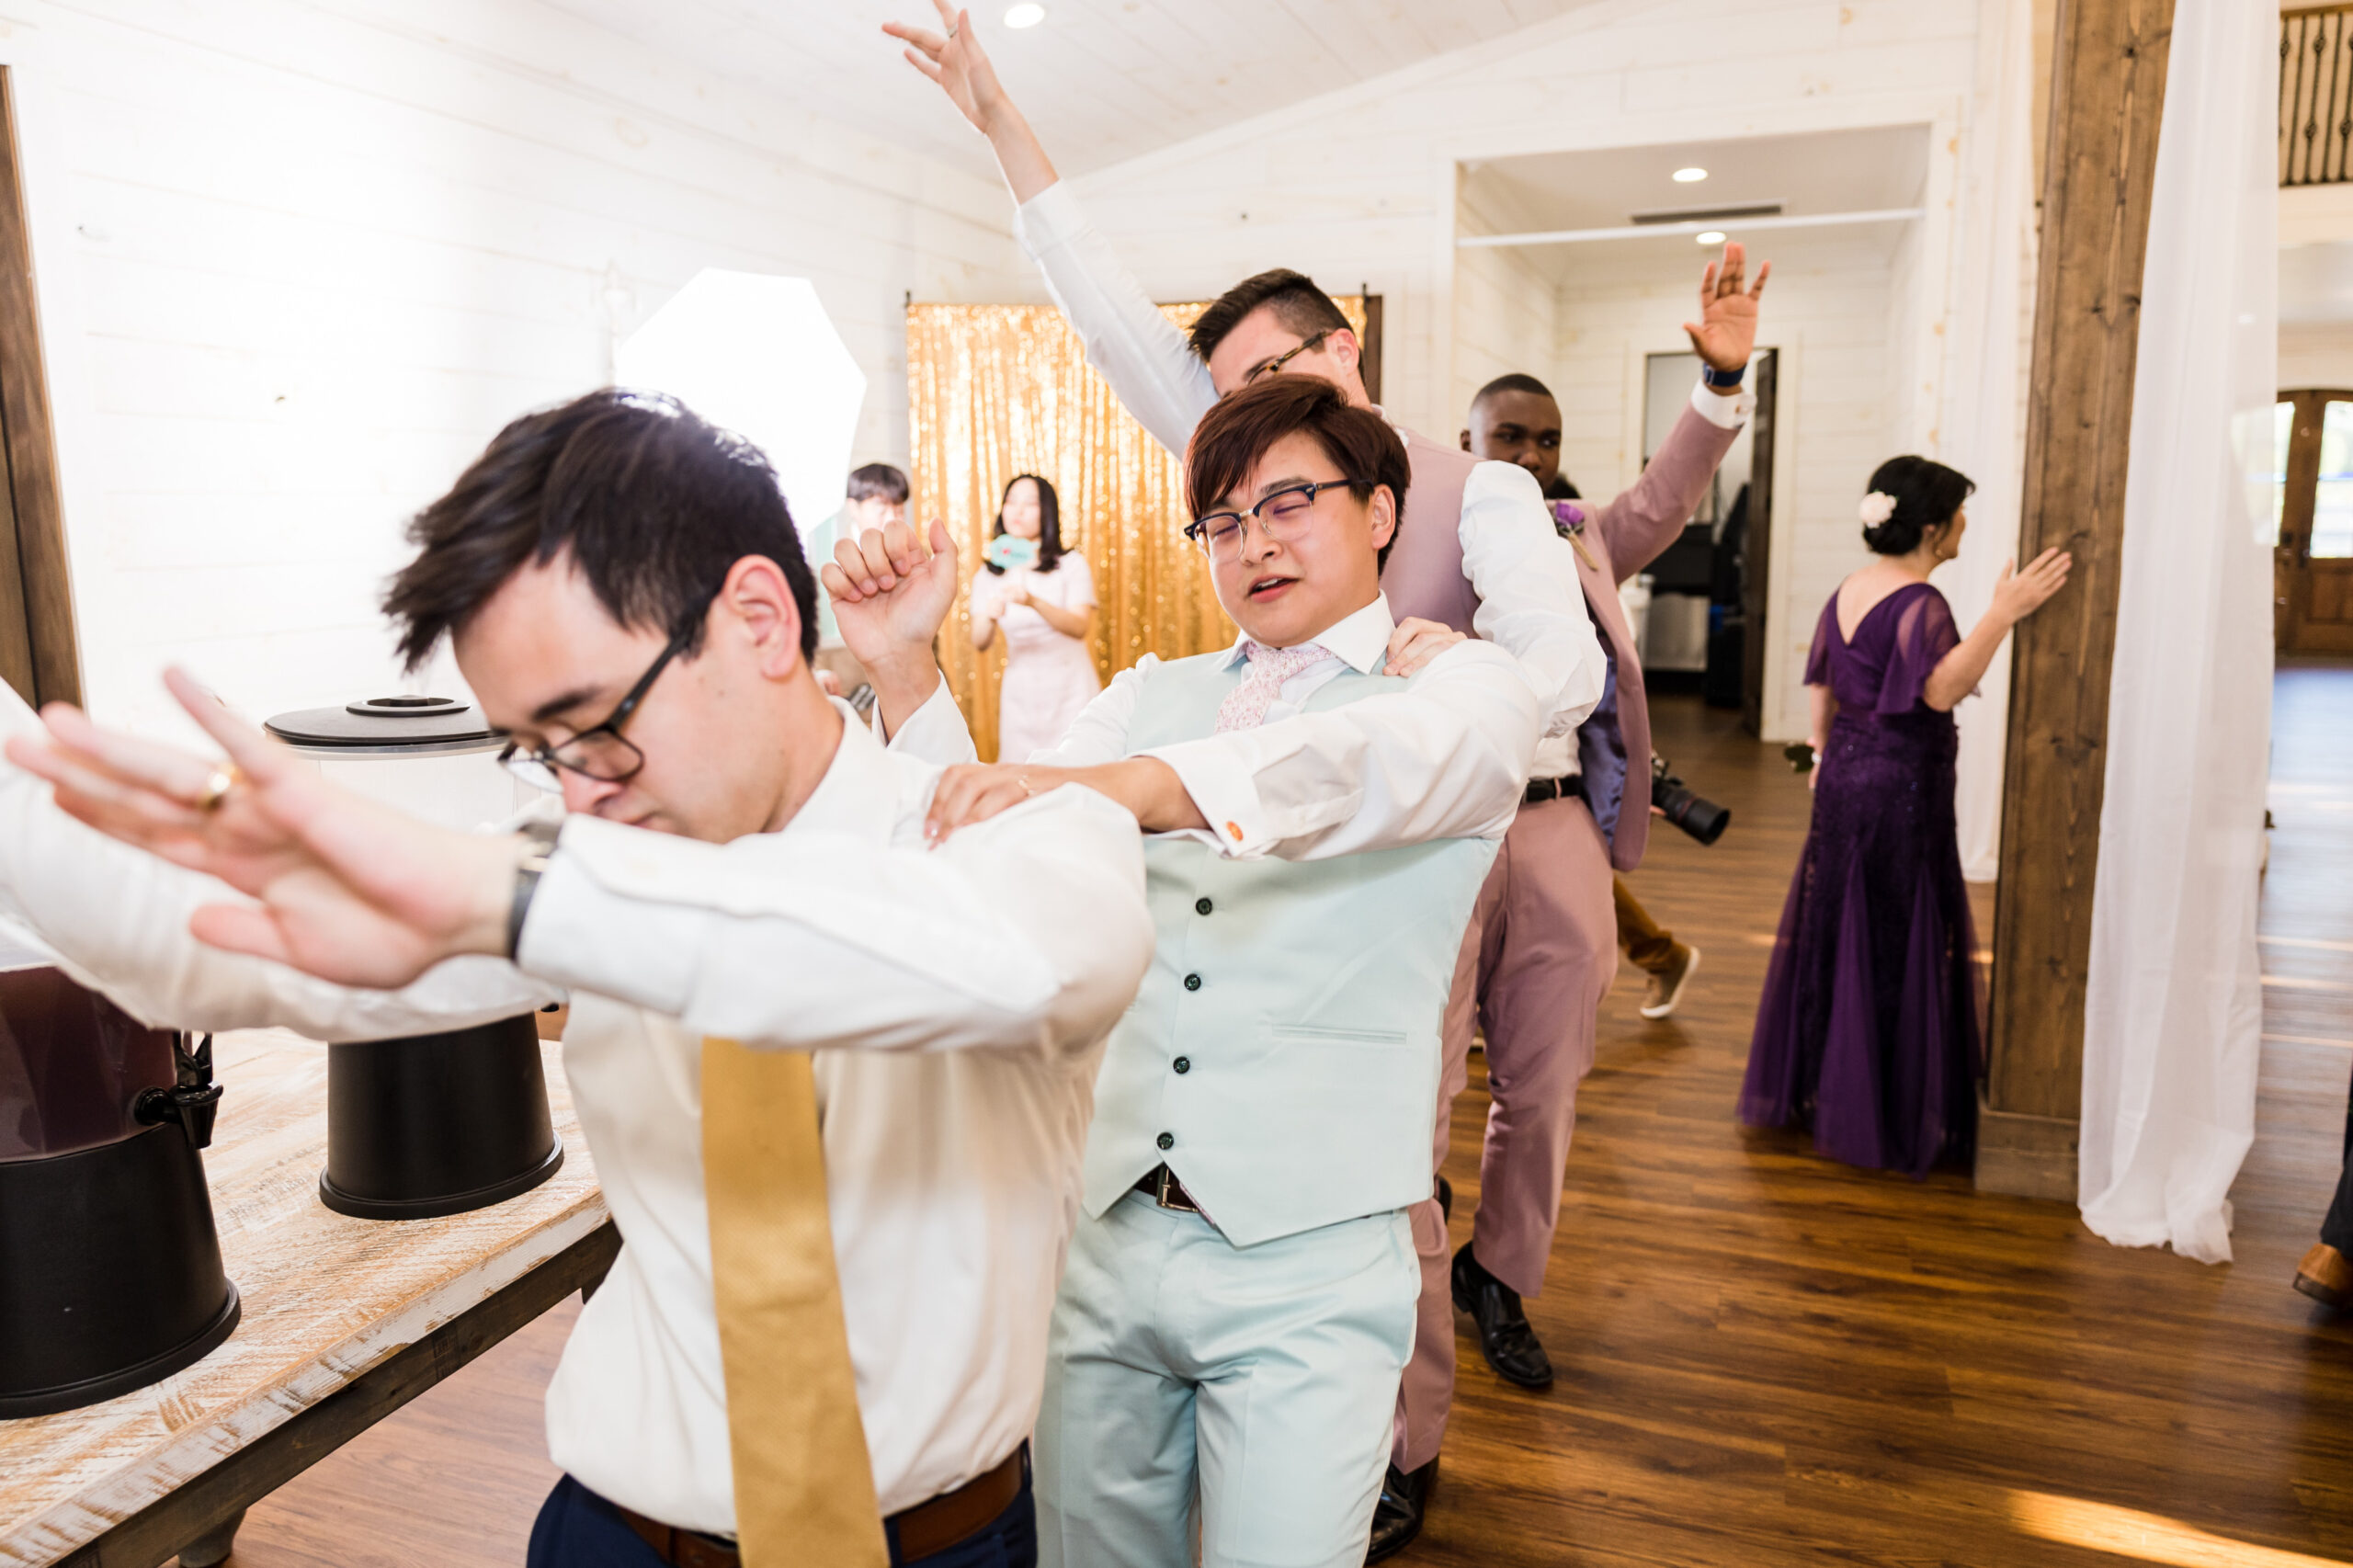 Groom and his groomsmen forms a line and dancing